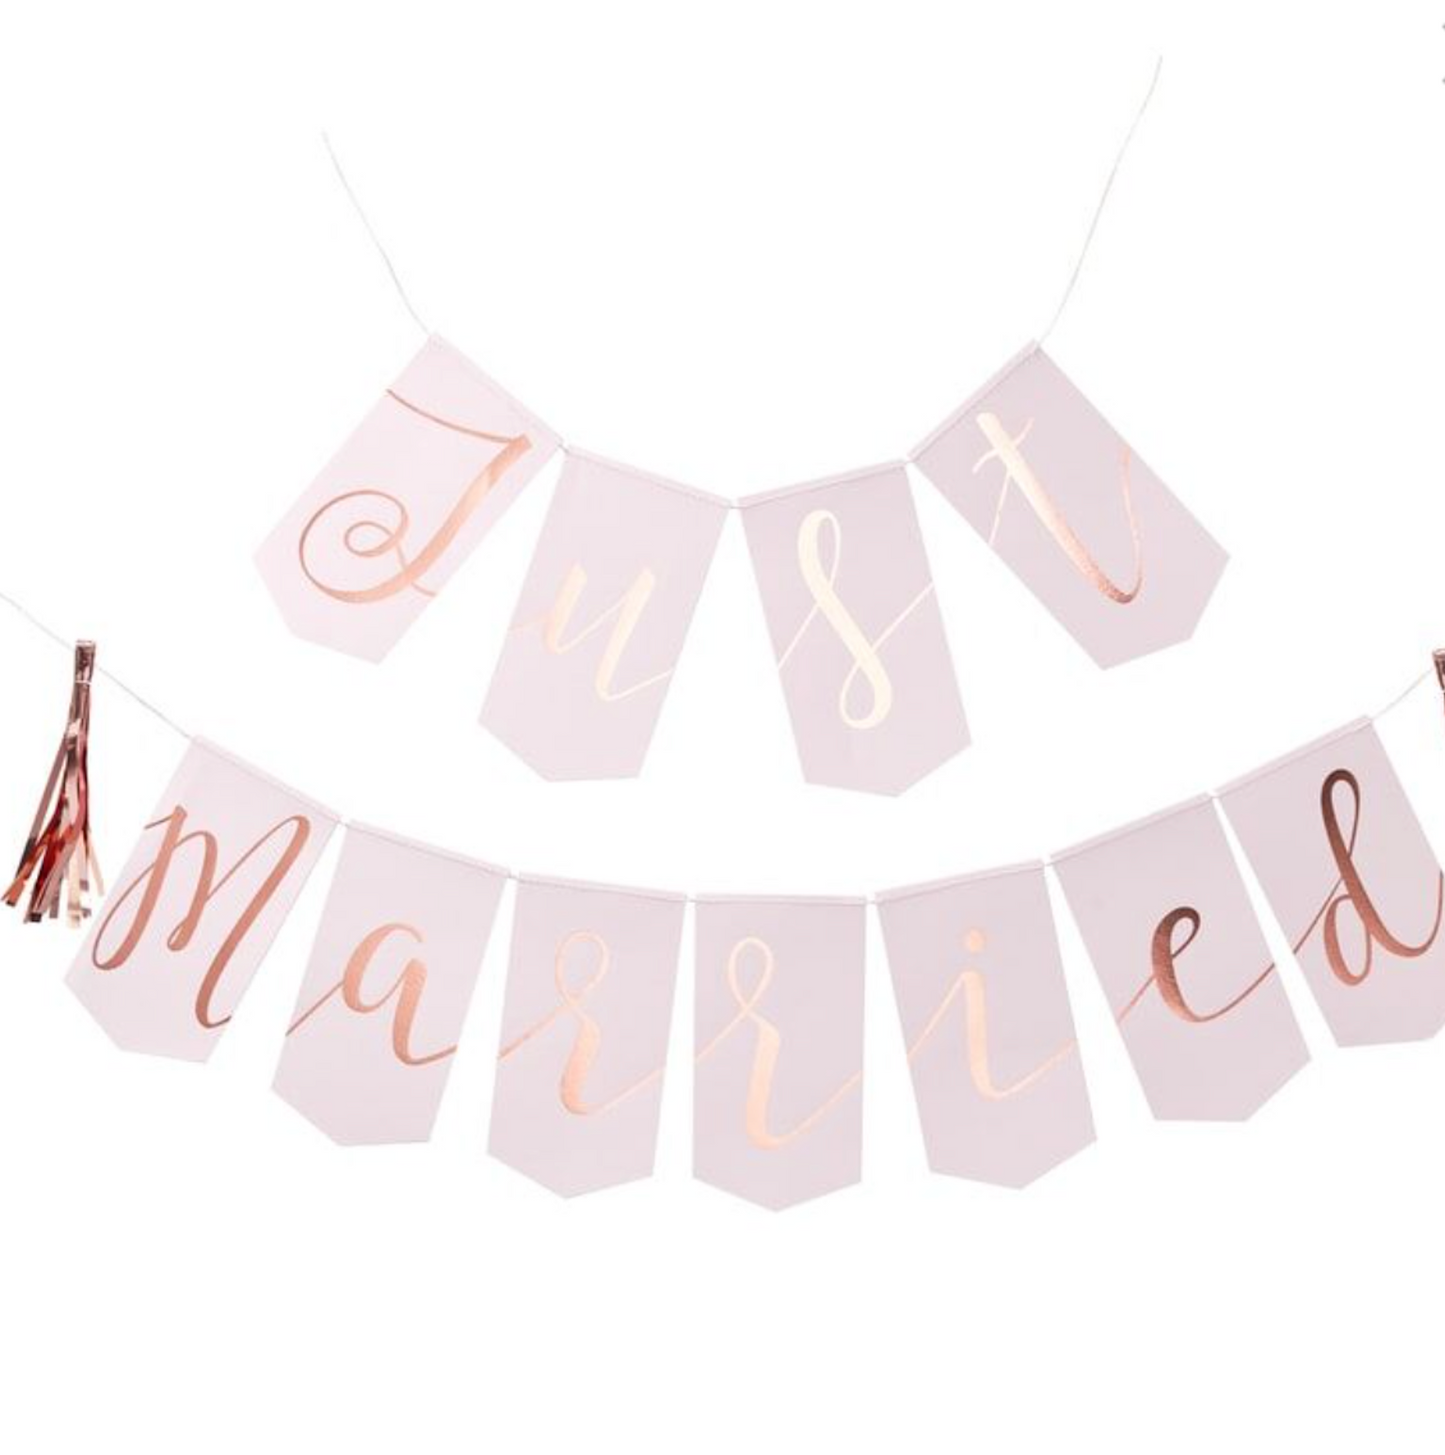 Just Married Rose Gold Wedding Bunting